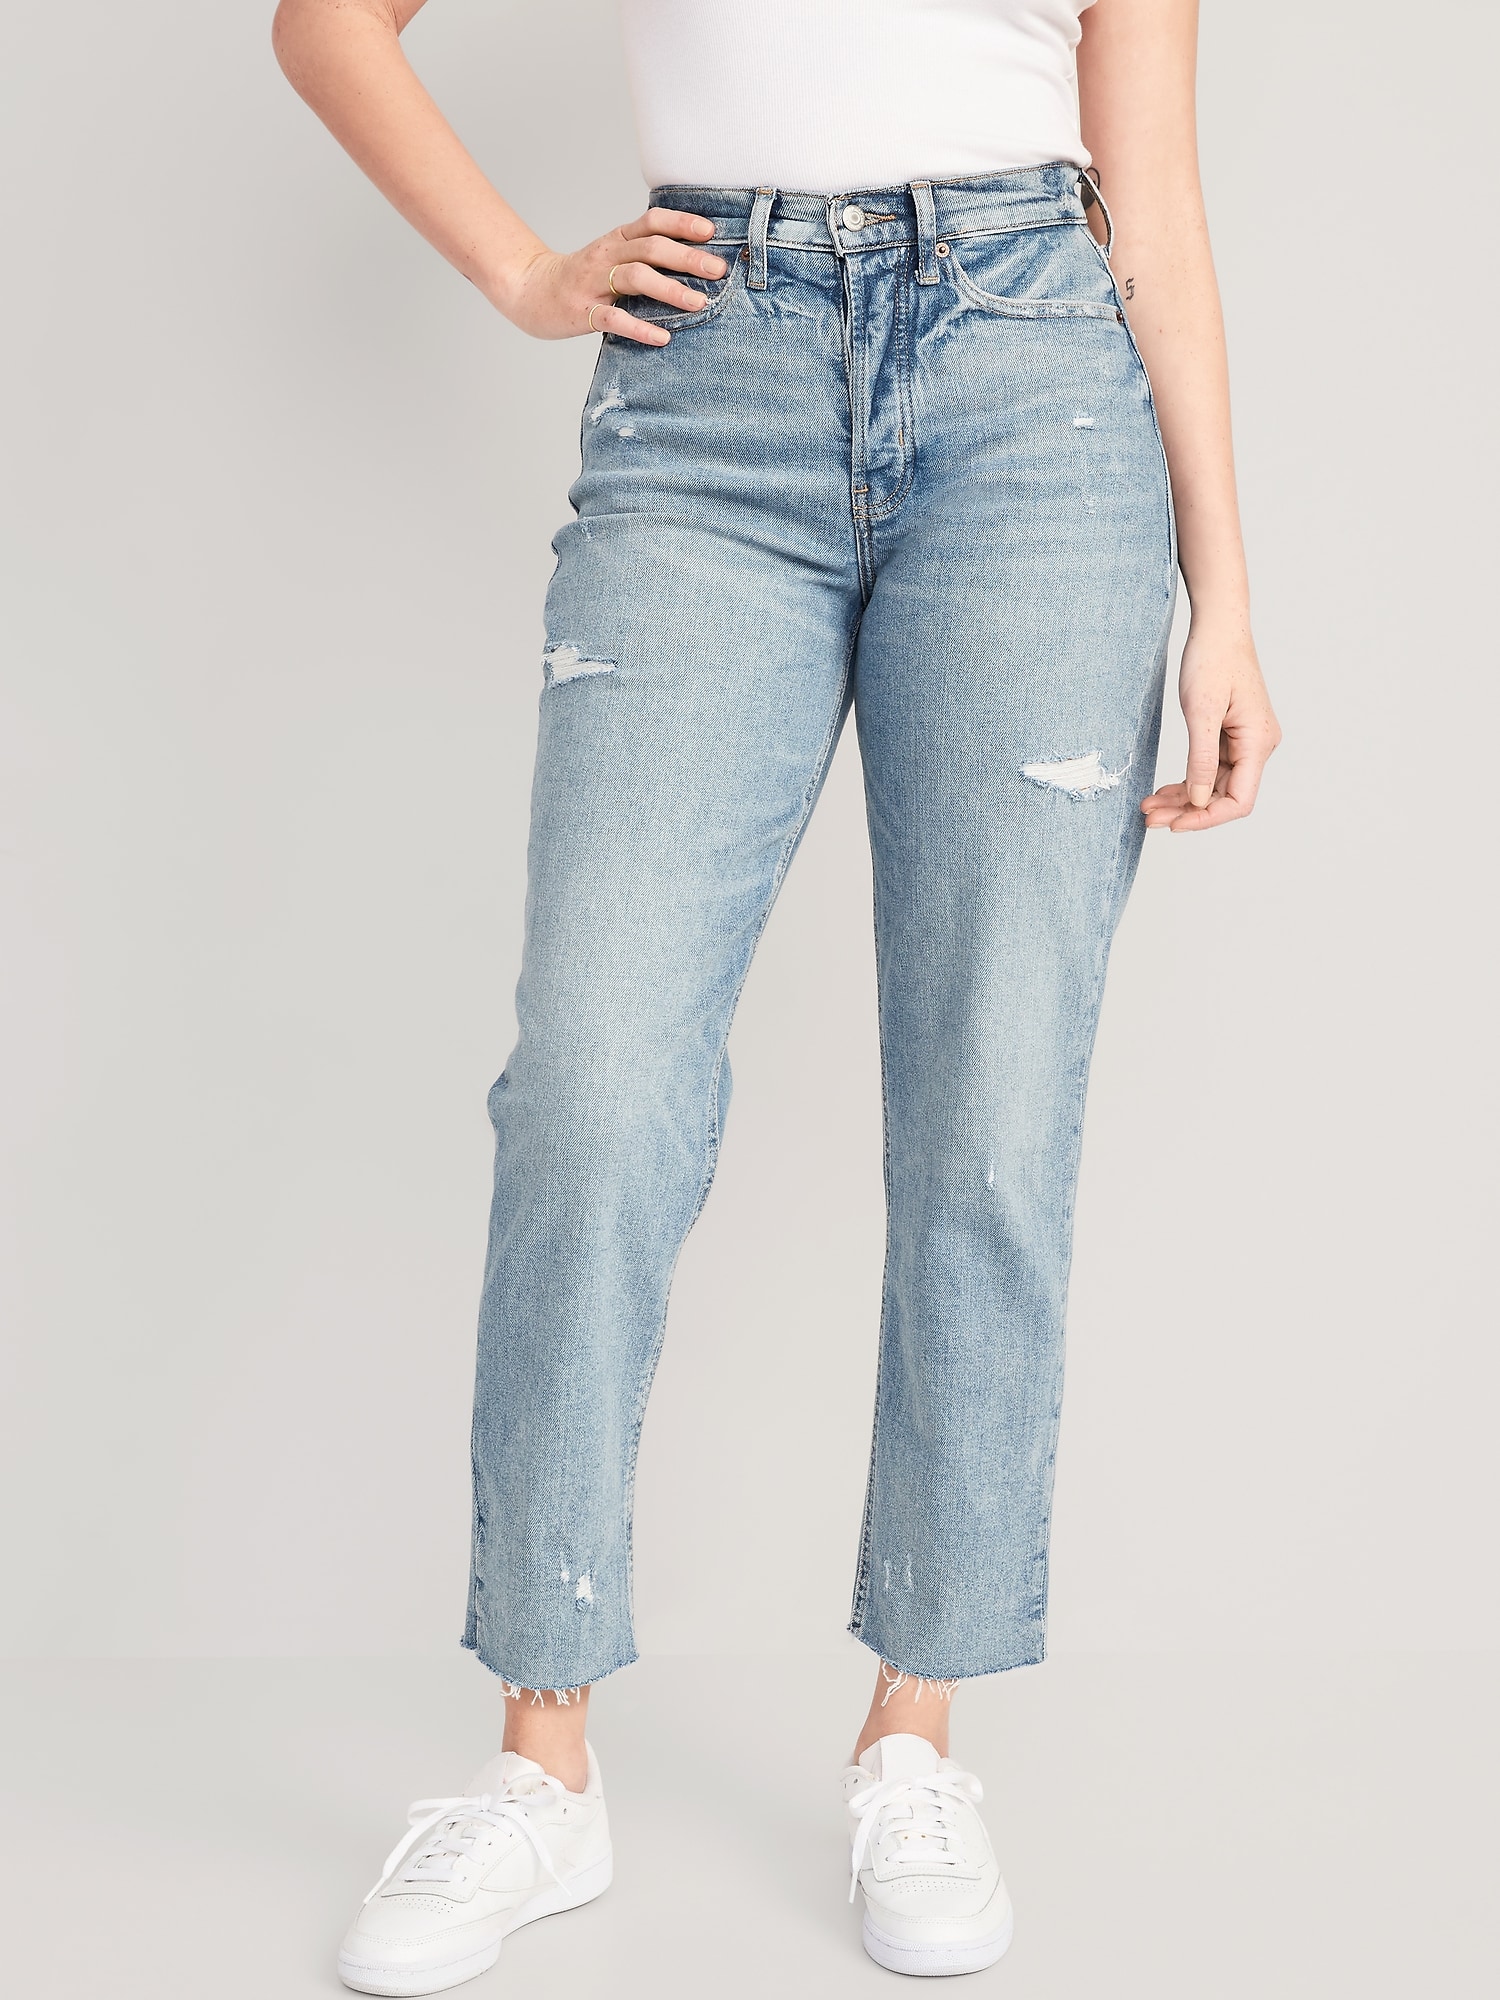 Oldnavy Curvy Extra High-Waisted Sky-Hi Straight Button-Fly Cut-Off Jeans for Women